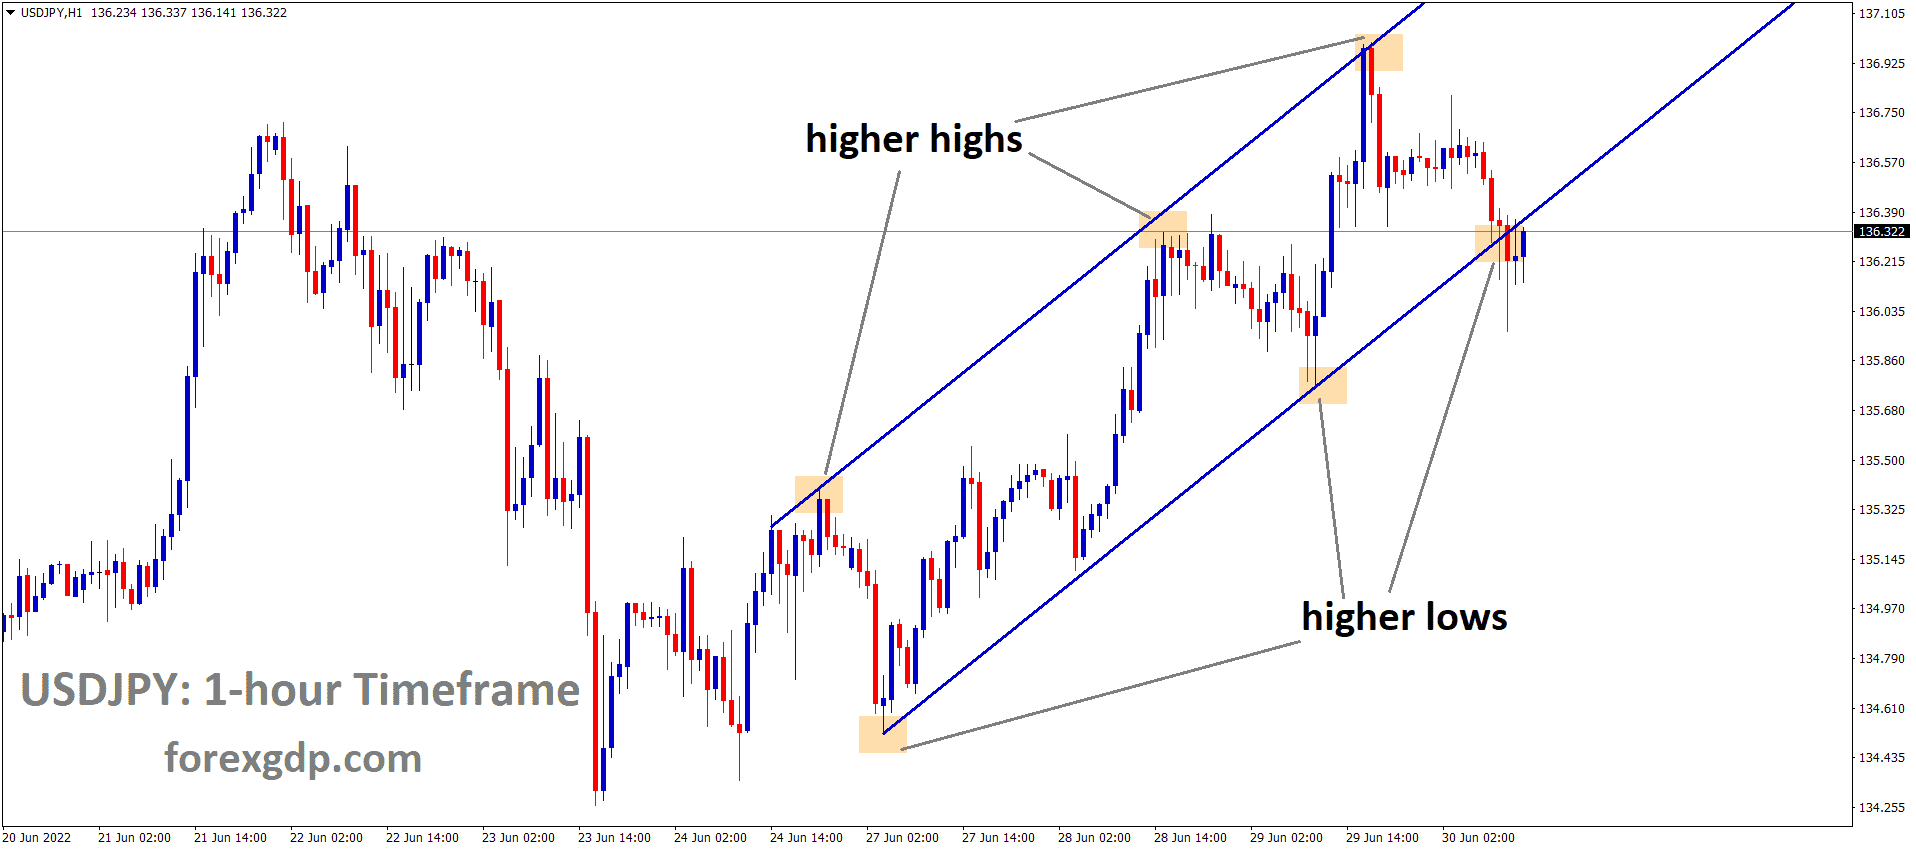 USDJPY is moving in an Ascending channel and the Market has reached the higher low area of the channel.